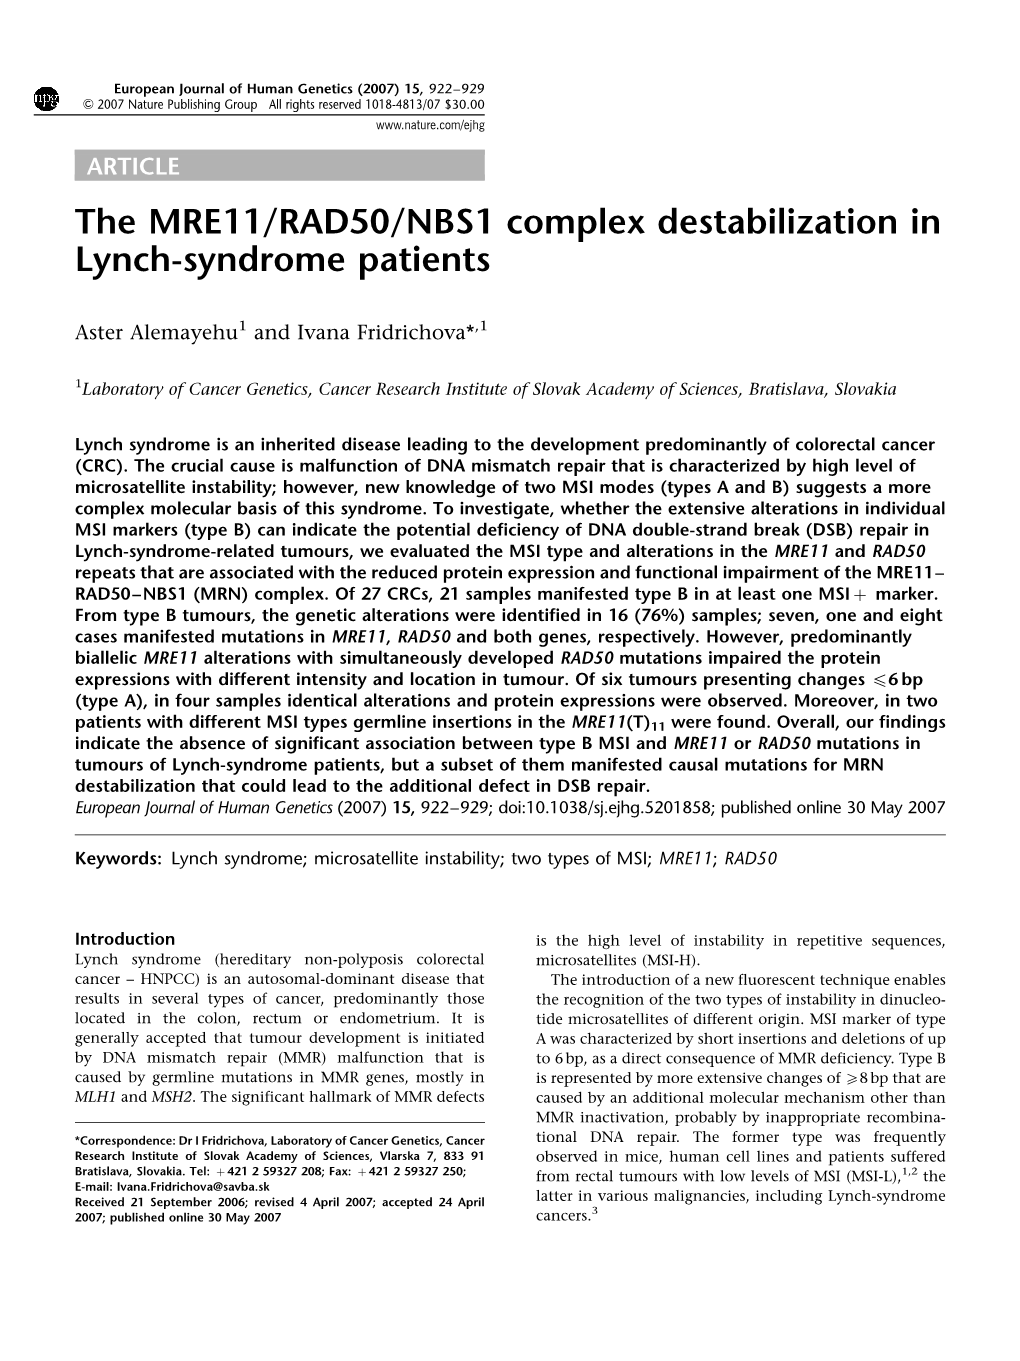 The MRE11/RAD50/NBS1 Complex Destabilization in Lynch-Syndrome Patients